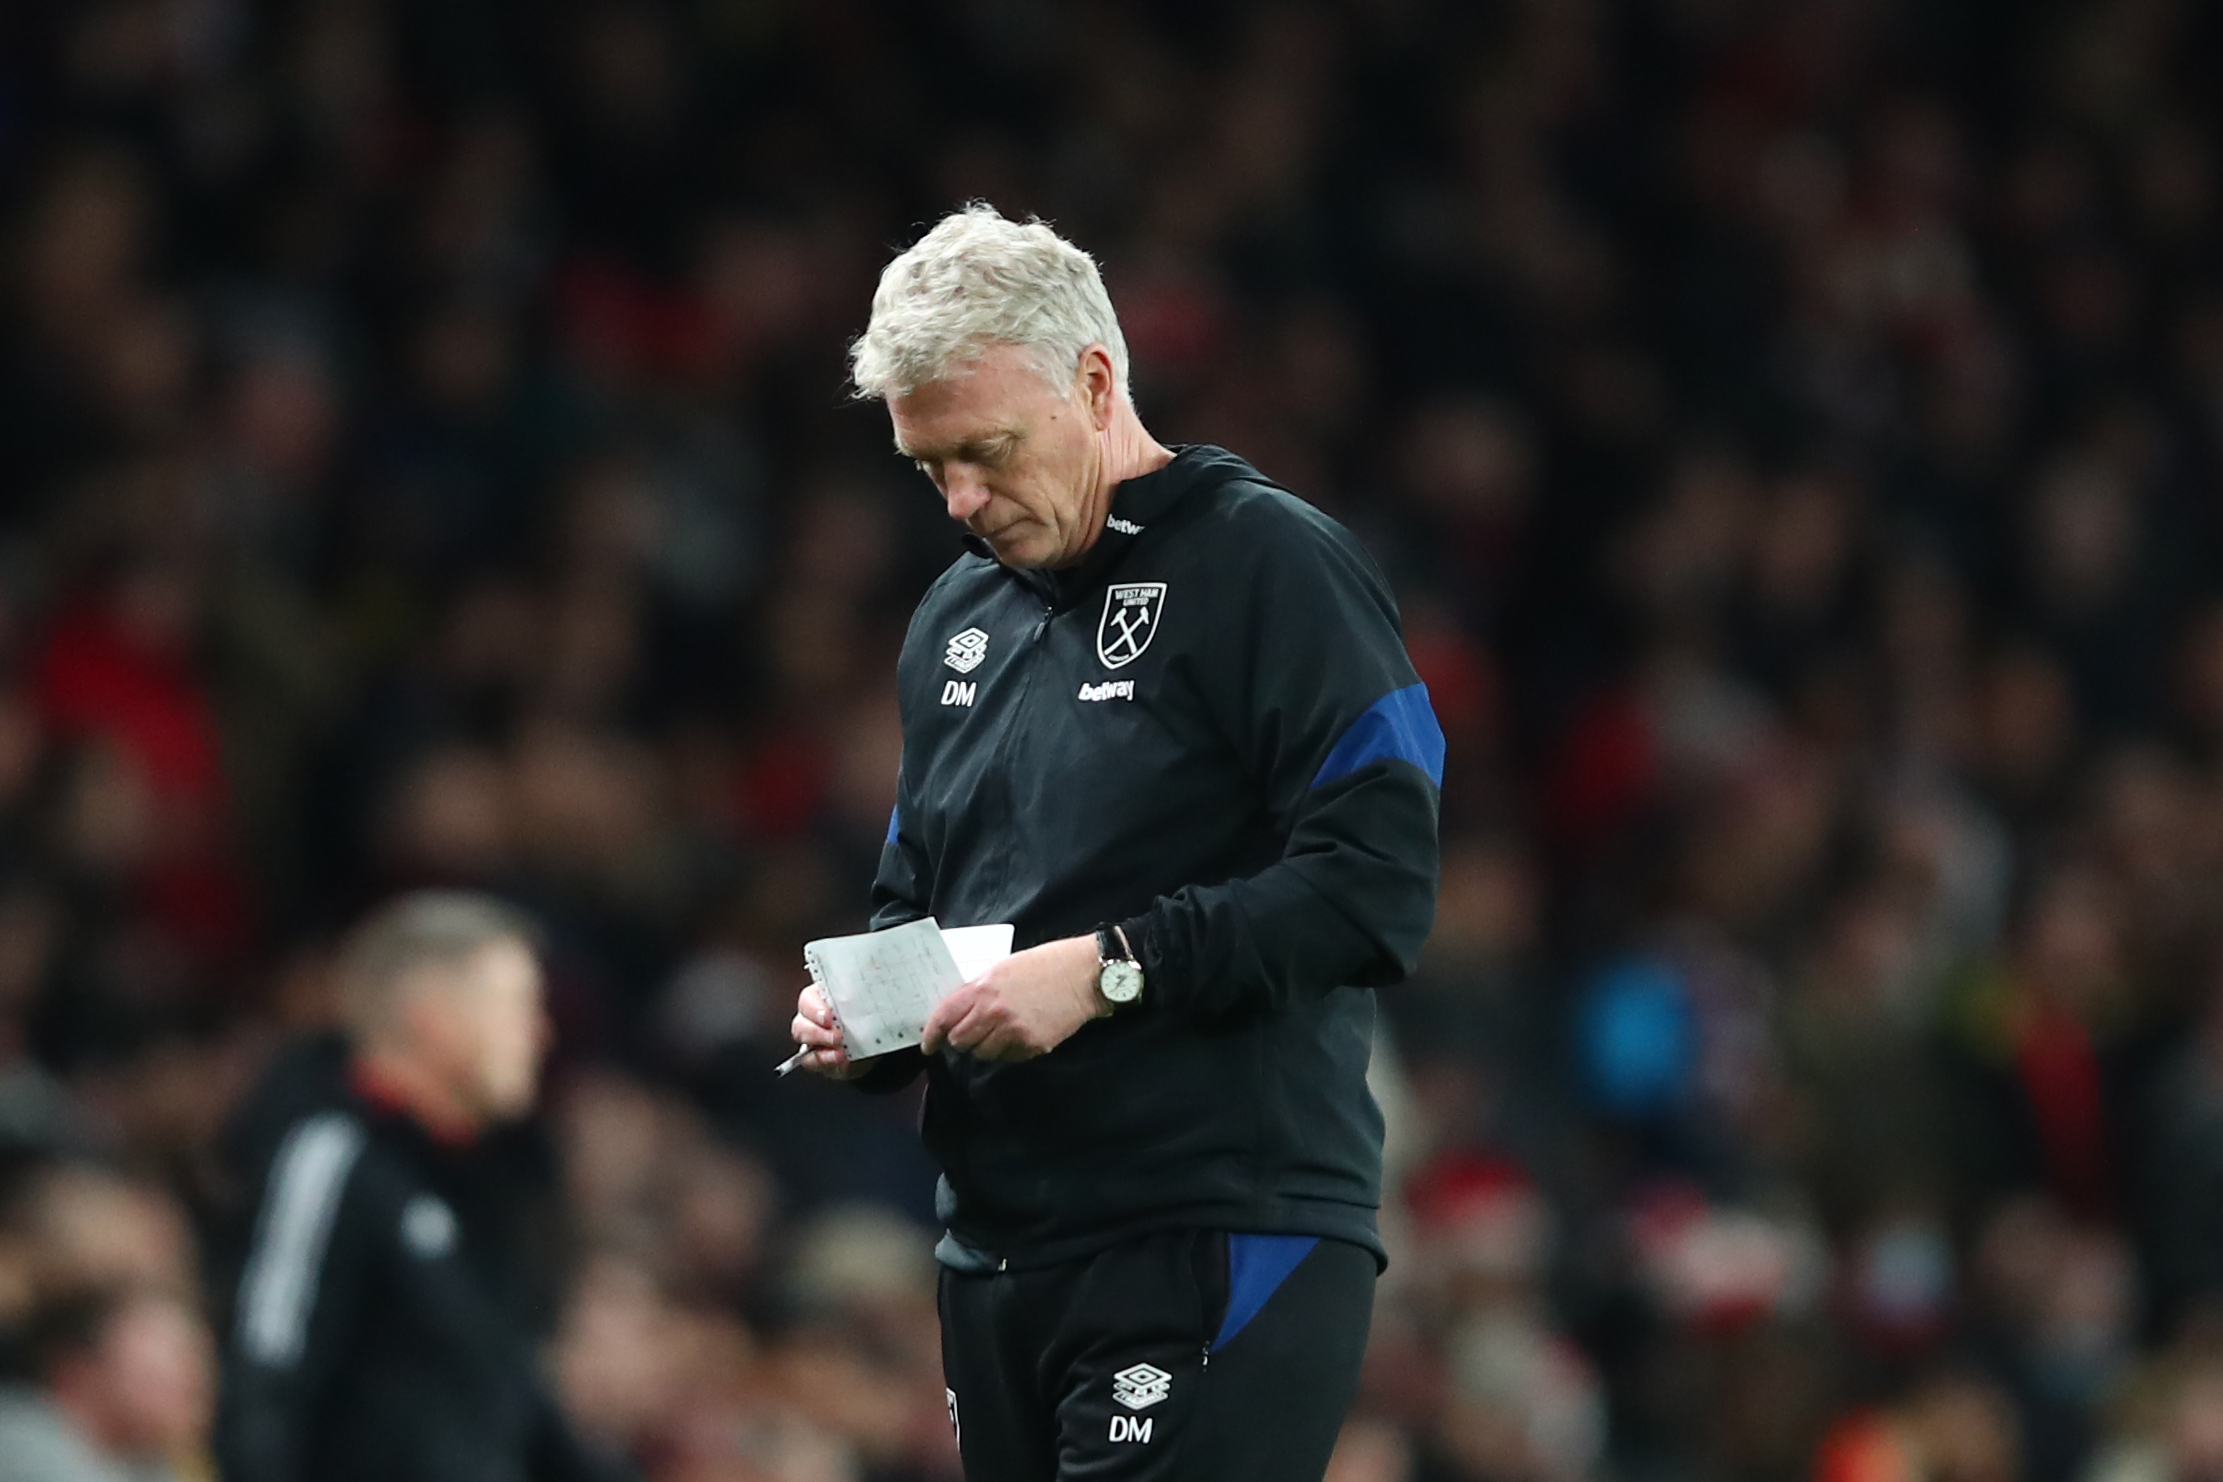 Predicted line-up: David Moyes pondering one big West Ham change for Crystal Palace as Covid uncertainty looms